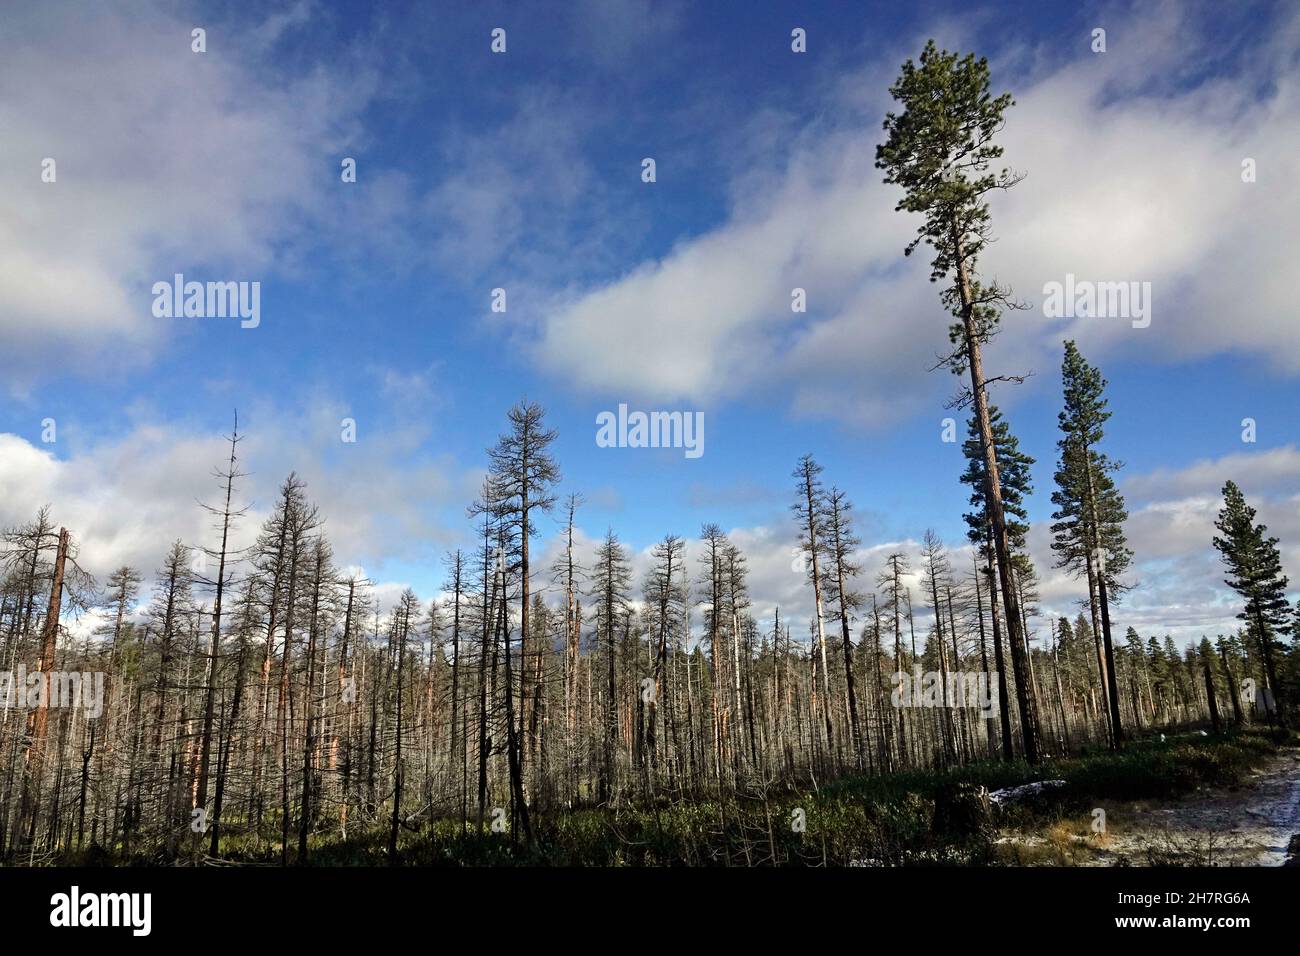 A few live trees standing among a burned out Ponderosa Pine forest in the Cascade Mountains of central Oregon. The forest fire that killed the trees w Stock Photo